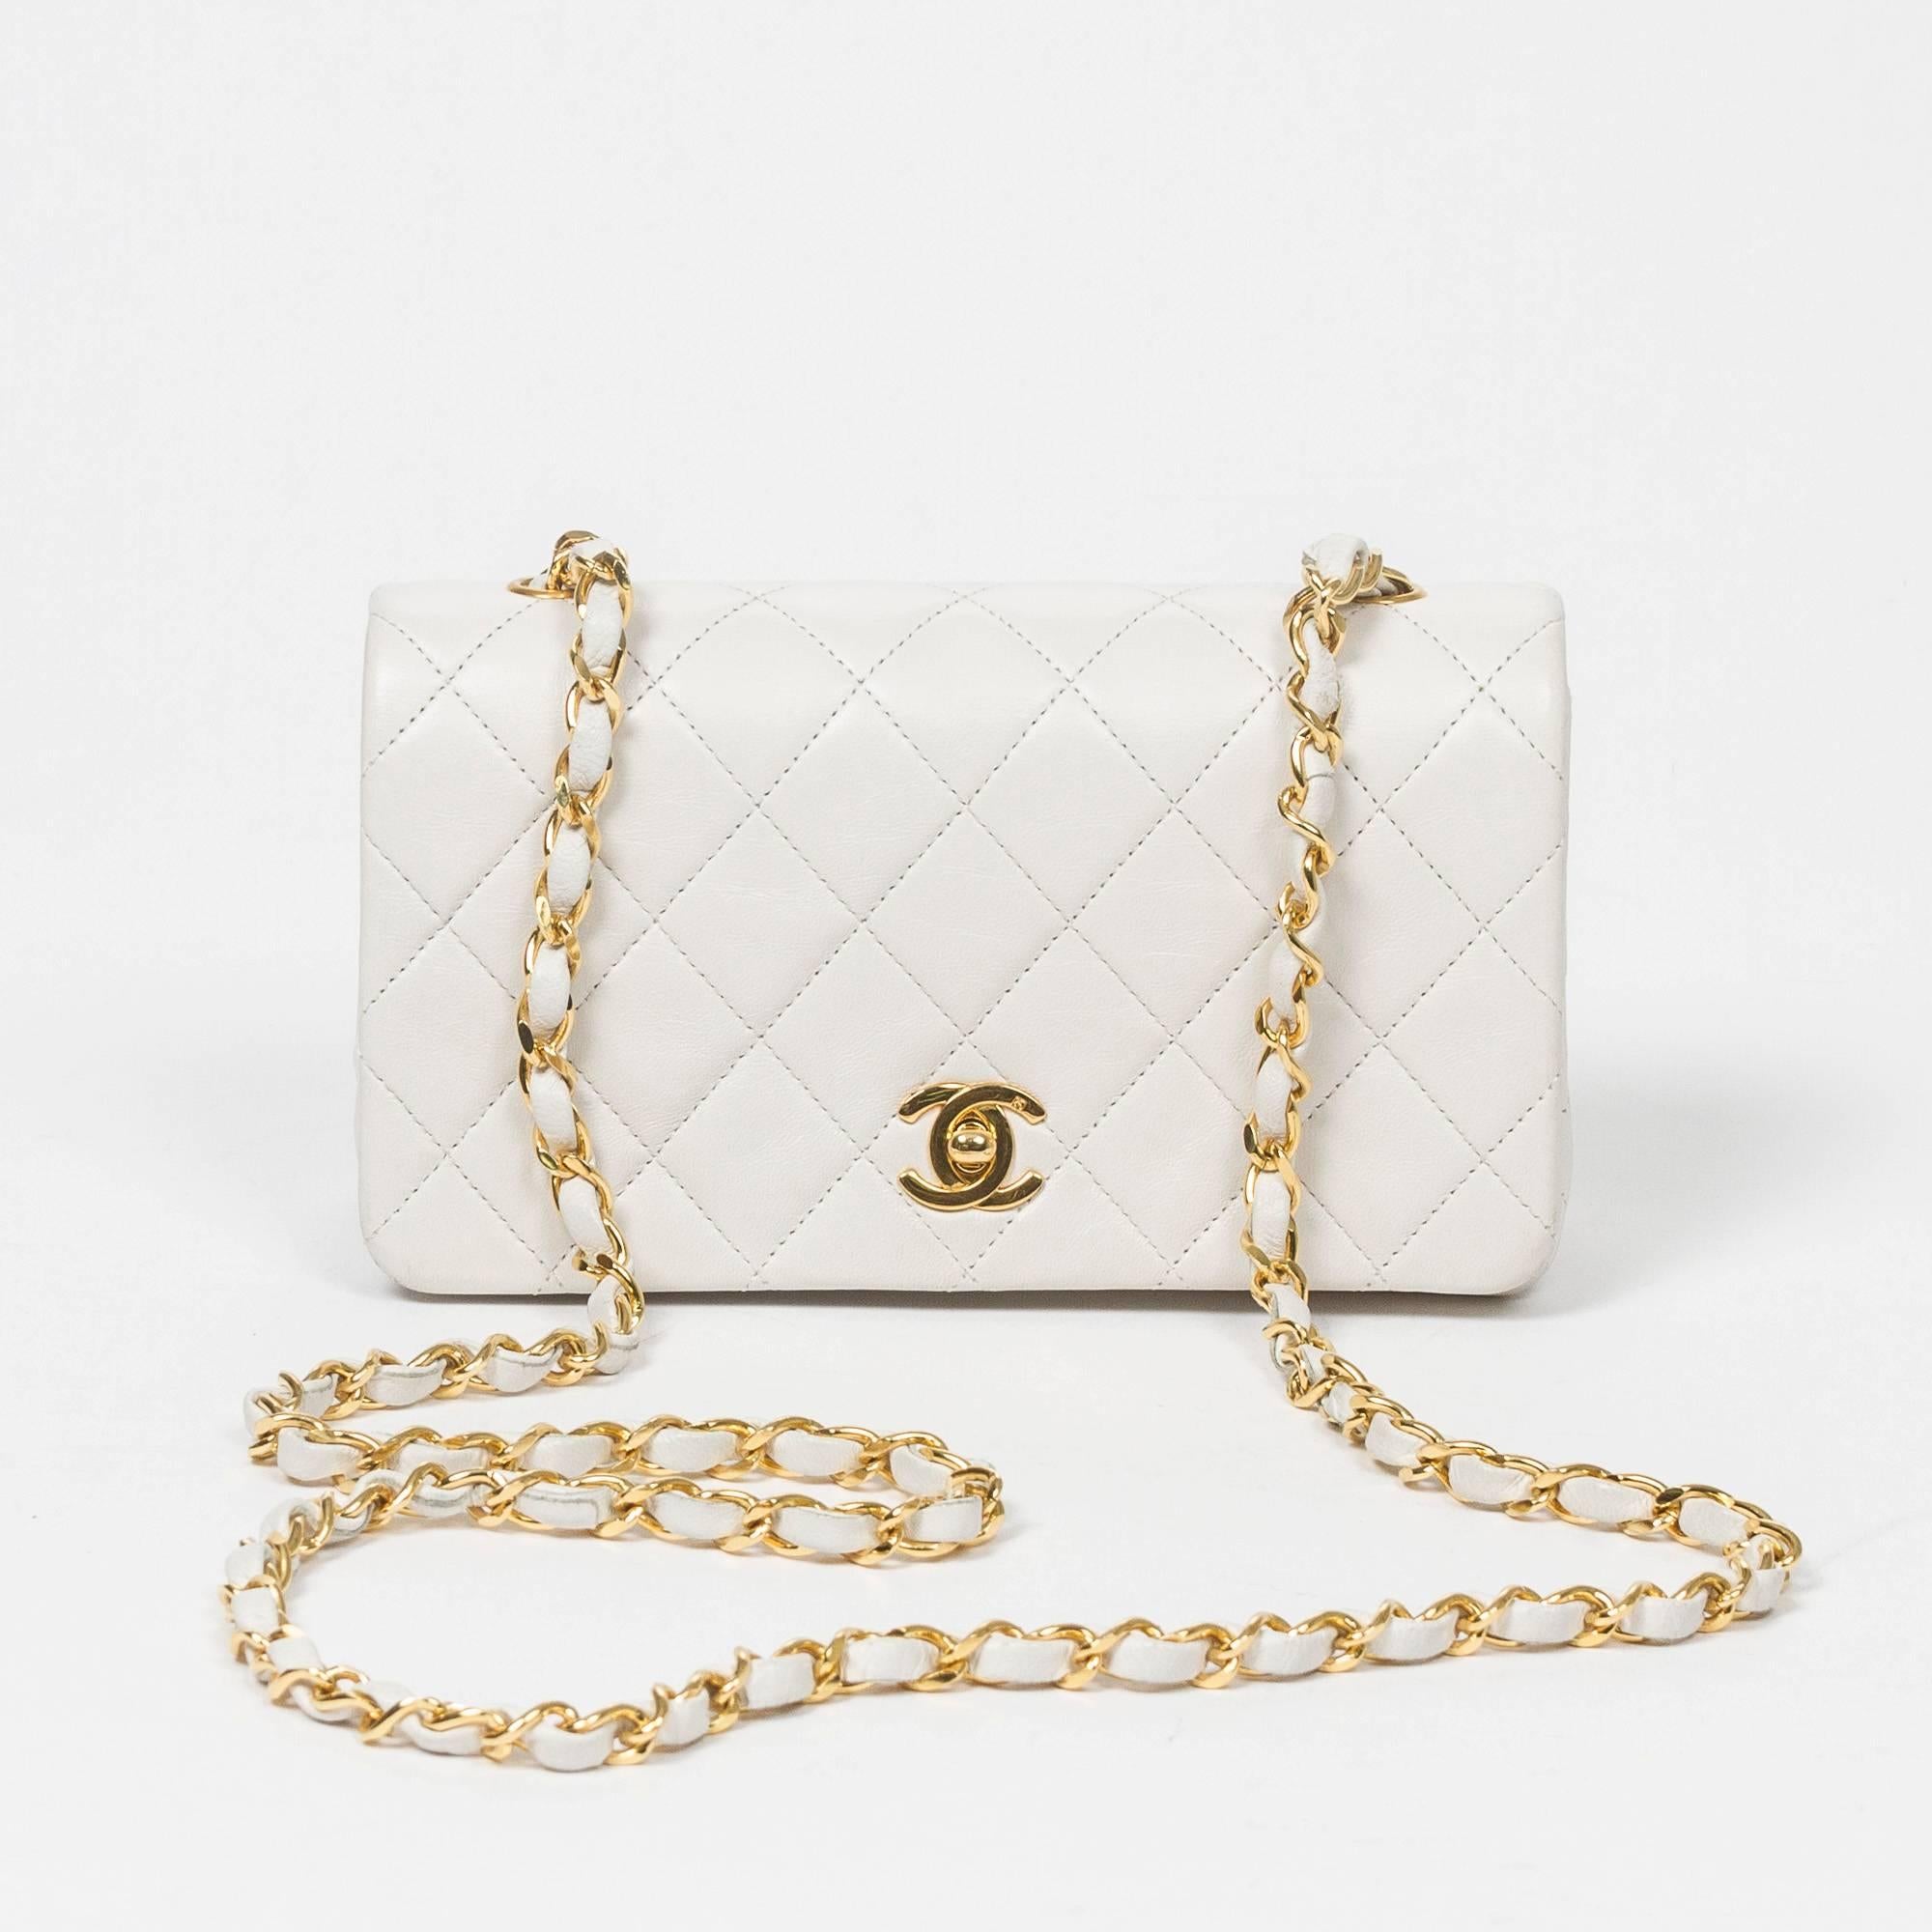 Chanel - Vintage Full Flap Bag White Quilted Leather 1